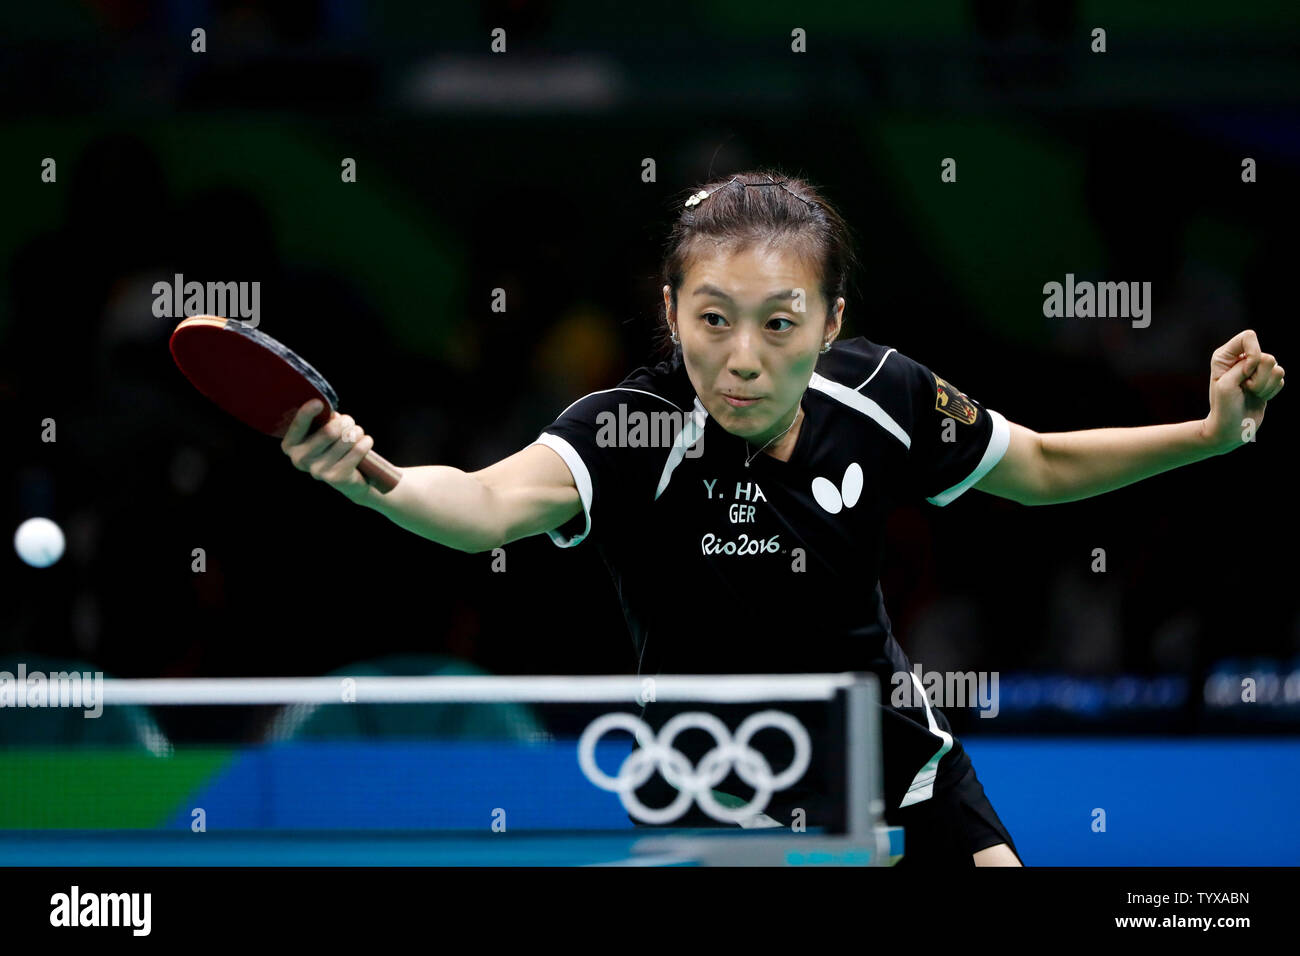 GermanyÕs Ying Han fires off a return in the Women's Team Table Tennis gold medal match against ChinaÕs Xiaoxia Li in Riocentro Pavilion 3 at the 2016 Rio Summer Olympics in Rio de Janeiro, Brazil, on August 16, 2016.   Photo by Matthew Healey/UPI Stock Photo